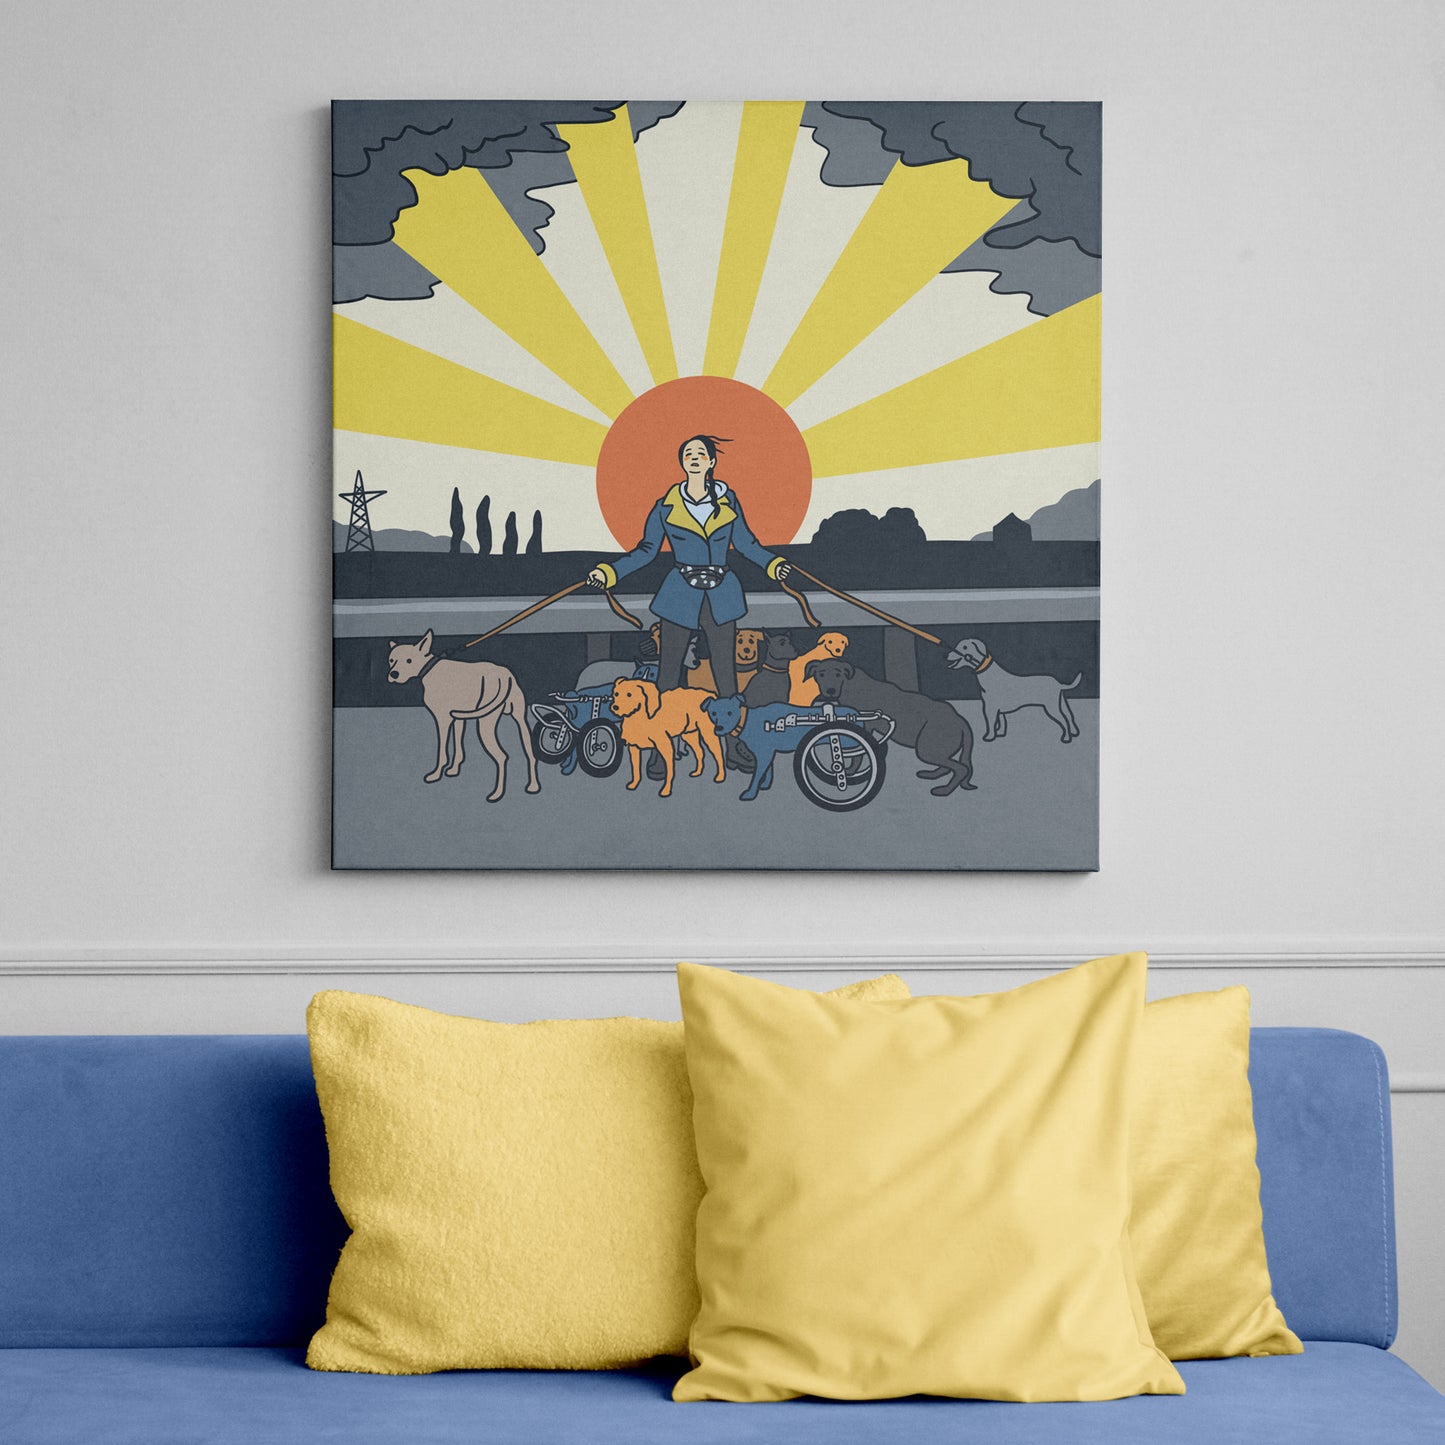 Canvas 14"-14" - Woman With Dogs